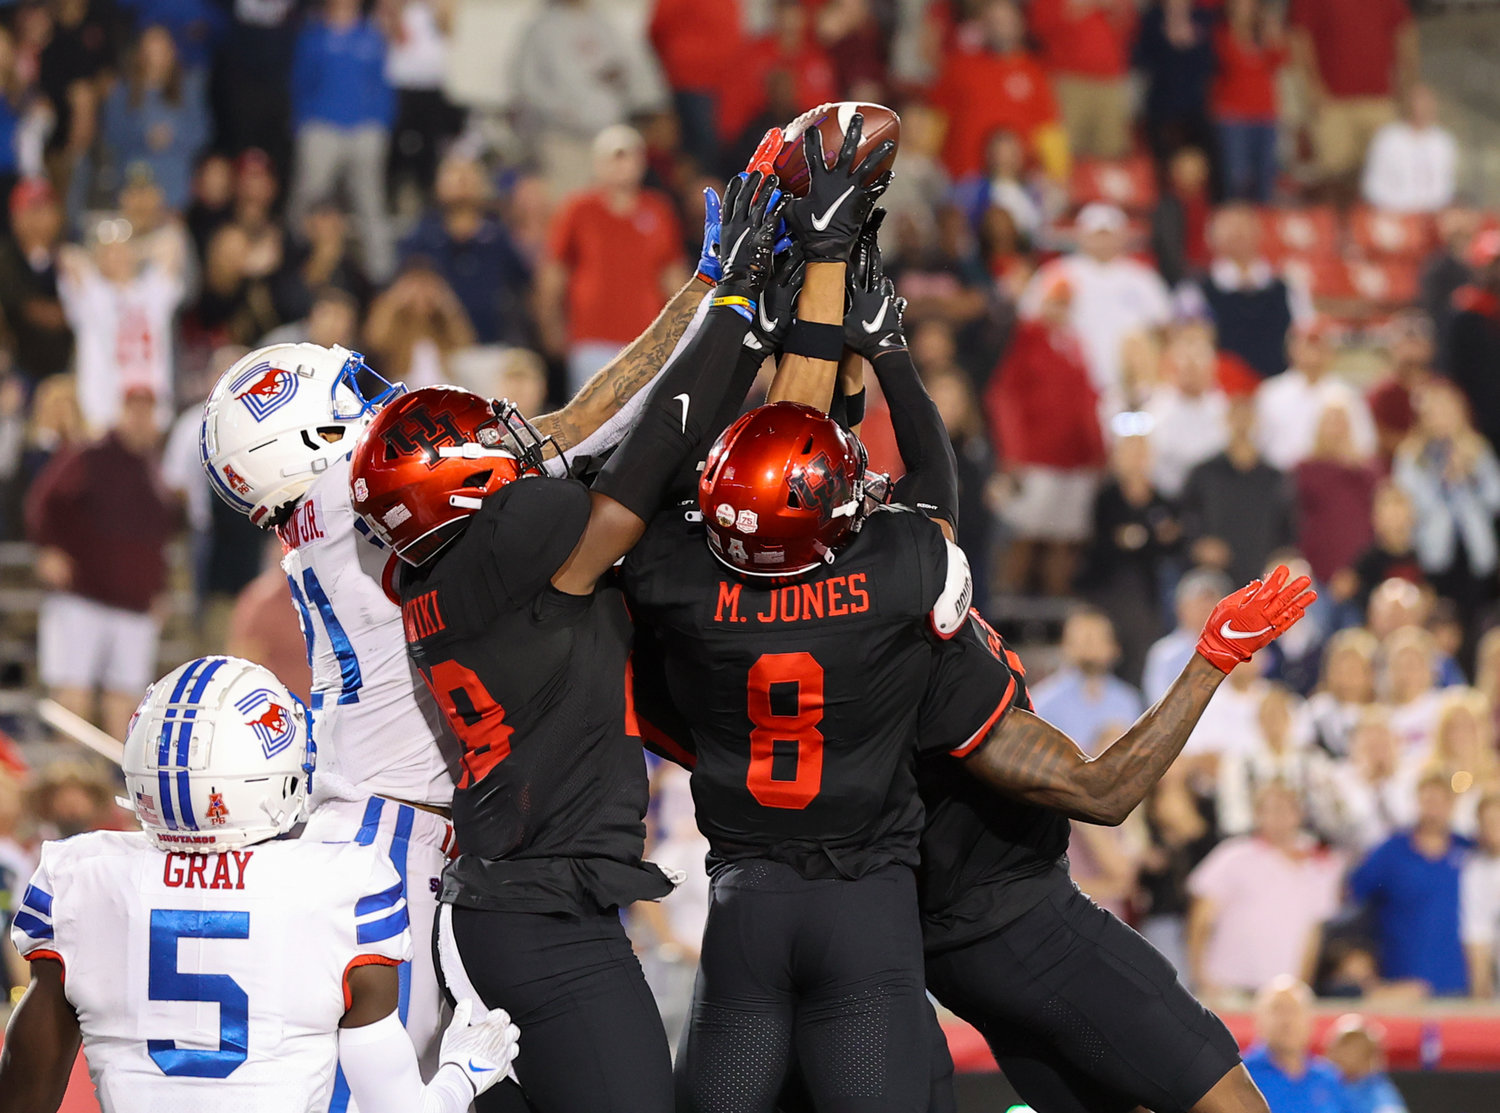 Houston Cougars defenders grab and knock down an attempted Hail Mary pass by SMU as Houston holds on to win 44-37 in an NCAA football game on October 30, 2021 in Houston, Texas.